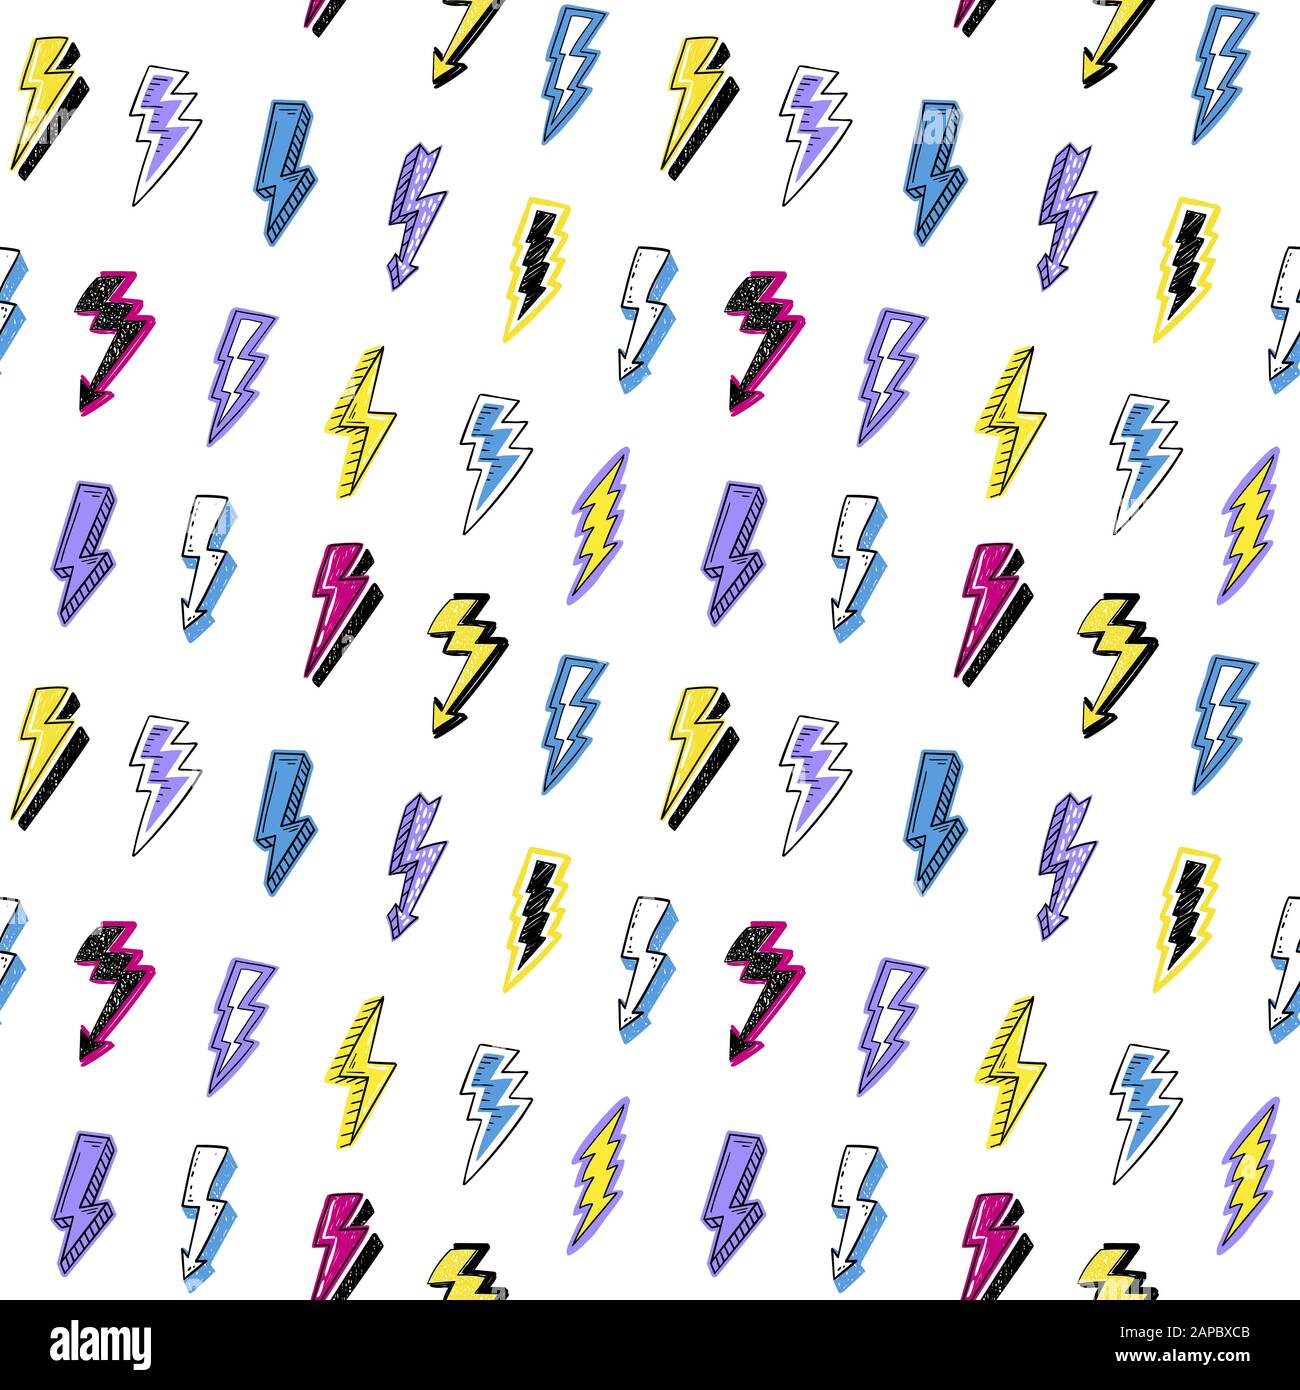 Thunder bolt seamless pattern. Flash symbol abstract abstract background for wallpaper, cover fills, web page background, surface textures, textile Stock Vector